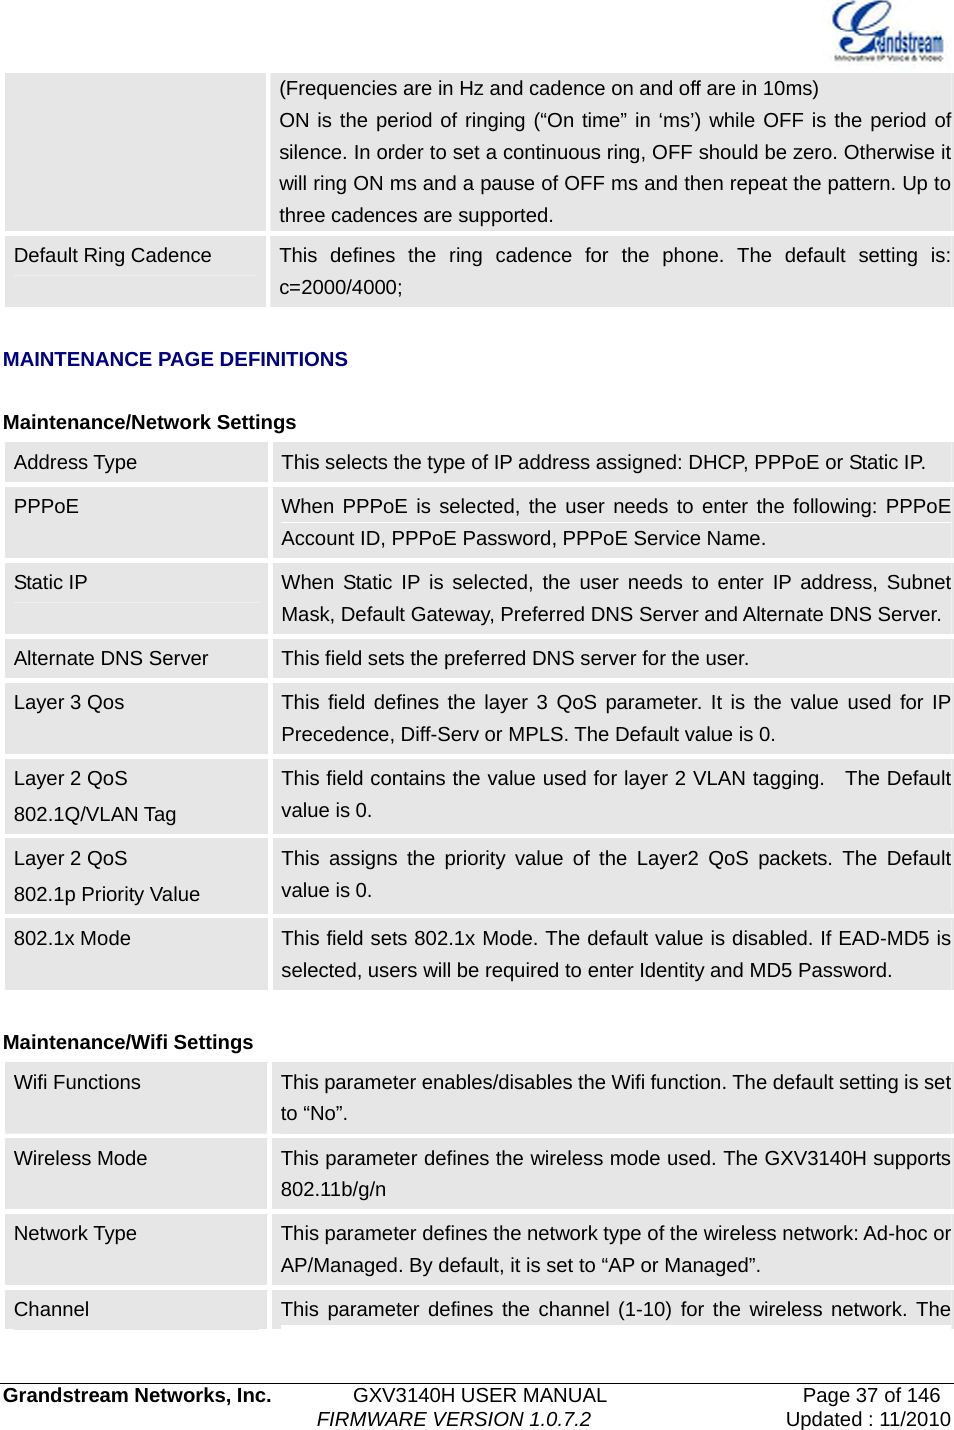   Grandstream Networks, Inc.        GXV3140H USER MANUAL                  Page 37 of 146                                FIRMWARE VERSION 1.0.7.2 Updated : 11/2010  (Frequencies are in Hz and cadence on and off are in 10ms) ON is the period of ringing (“On time” in ‘ms’) while OFF is the period of silence. In order to set a continuous ring, OFF should be zero. Otherwise it will ring ON ms and a pause of OFF ms and then repeat the pattern. Up to three cadences are supported. Default Ring Cadence  This defines the ring cadence for the phone. The default setting is: c=2000/4000;  MAINTENANCE PAGE DEFINITIONS  Maintenance/Network Settings Address Type  This selects the type of IP address assigned: DHCP, PPPoE or Static IP.   PPPoE  When PPPoE is selected, the user needs to enter the following: PPPoE Account ID, PPPoE Password, PPPoE Service Name. Static IP  When Static IP is selected, the user needs to enter IP address, Subnet Mask, Default Gateway, Preferred DNS Server and Alternate DNS Server.Alternate DNS Server  This field sets the preferred DNS server for the user. Layer 3 Qos  This field defines the layer 3 QoS parameter. It is the value used for IP Precedence, Diff-Serv or MPLS. The Default value is 0. Layer 2 QoS   802.1Q/VLAN Tag This field contains the value used for layer 2 VLAN tagging.    The Default value is 0. Layer 2 QoS   802.1p Priority Value This assigns the priority value of the Layer2 QoS packets. The Default value is 0. 802.1x Mode  This field sets 802.1x Mode. The default value is disabled. If EAD-MD5 is selected, users will be required to enter Identity and MD5 Password.  Maintenance/Wifi Settings Wifi Functions    This parameter enables/disables the Wifi function. The default setting is set to “No”.   Wireless Mode  This parameter defines the wireless mode used. The GXV3140H supports 802.11b/g/n   Network Type  This parameter defines the network type of the wireless network: Ad-hoc or AP/Managed. By default, it is set to “AP or Managed”.   Channel  This parameter defines the channel (1-10) for the wireless network. The 